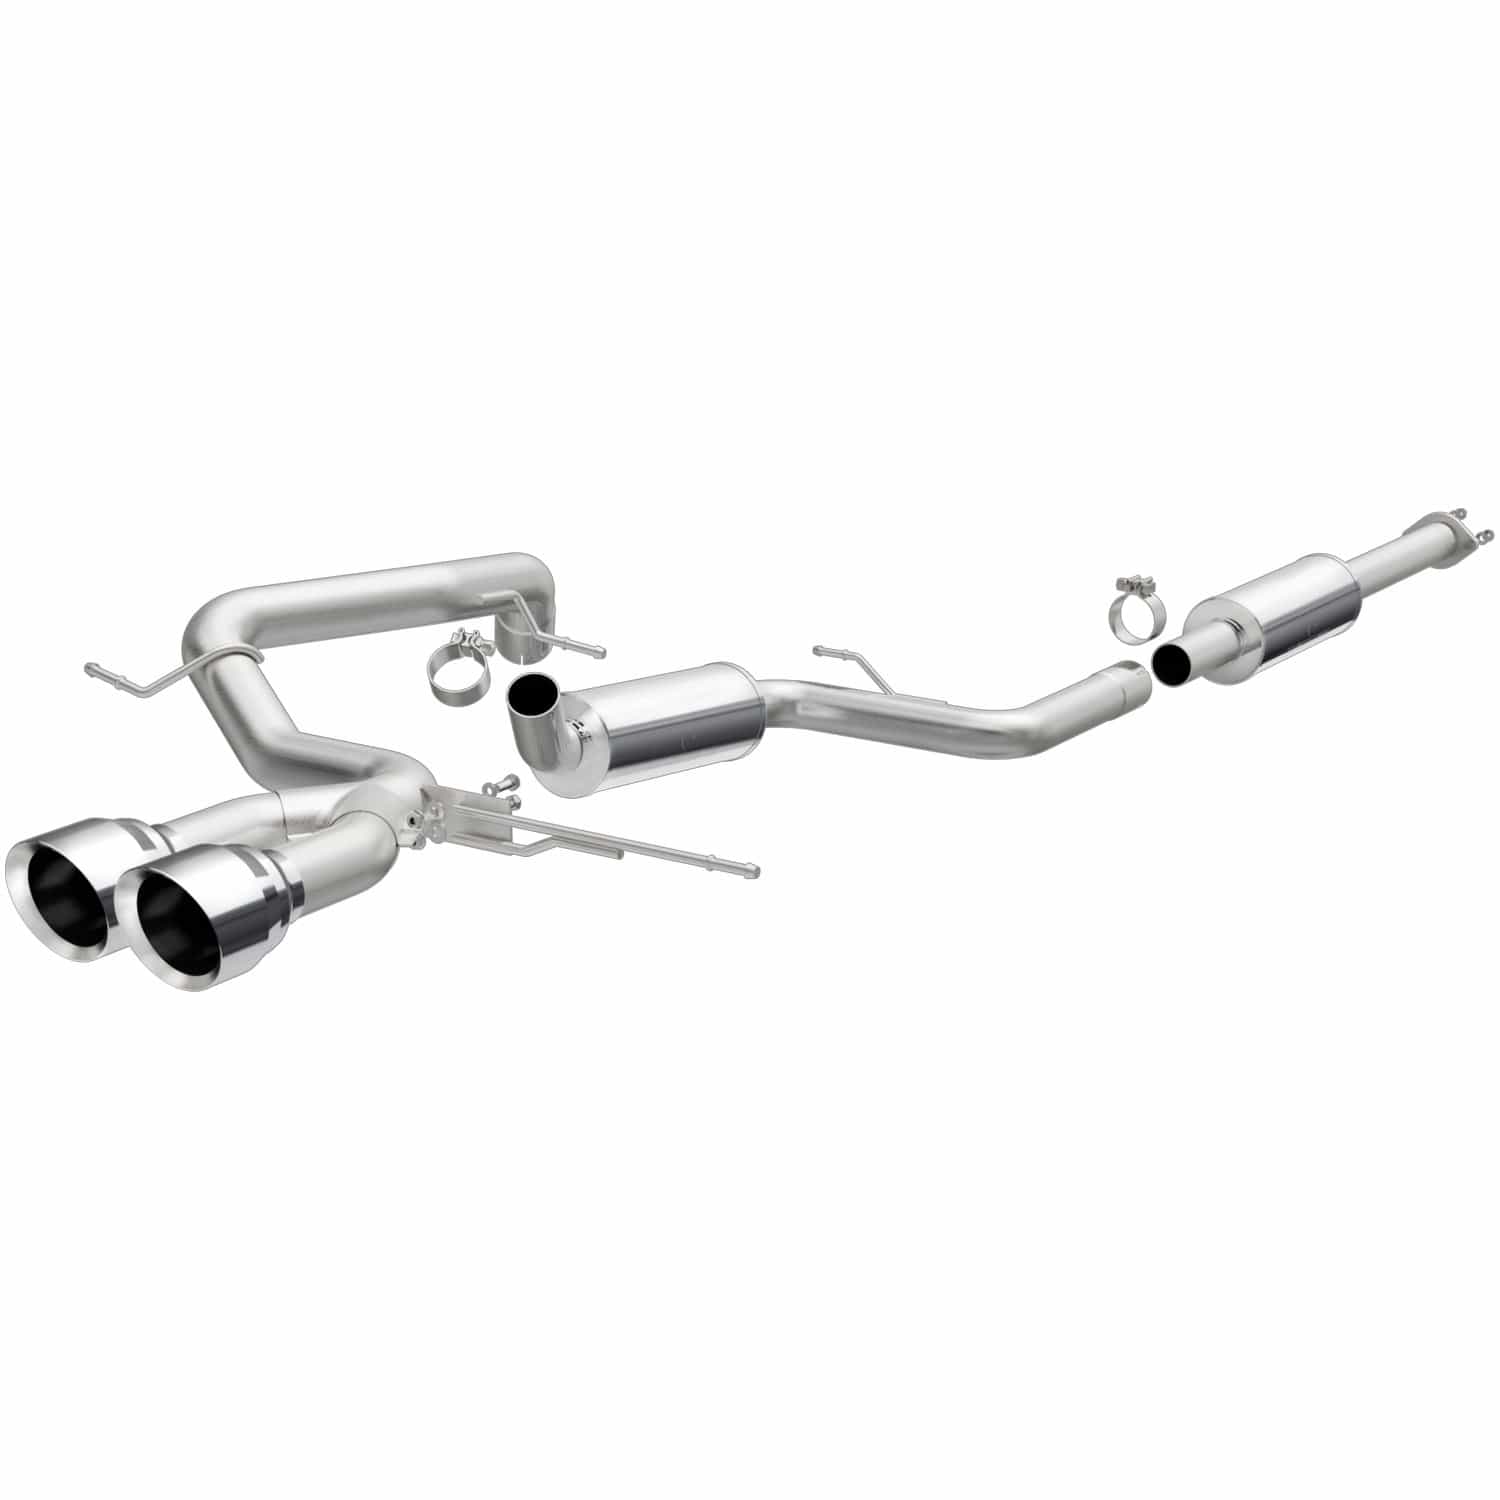 MagnaFlow 15155 Street Series Cat-Back Performance Exhaust System - 2013-2018 Ford Focus ST on Bleeding Tarmac